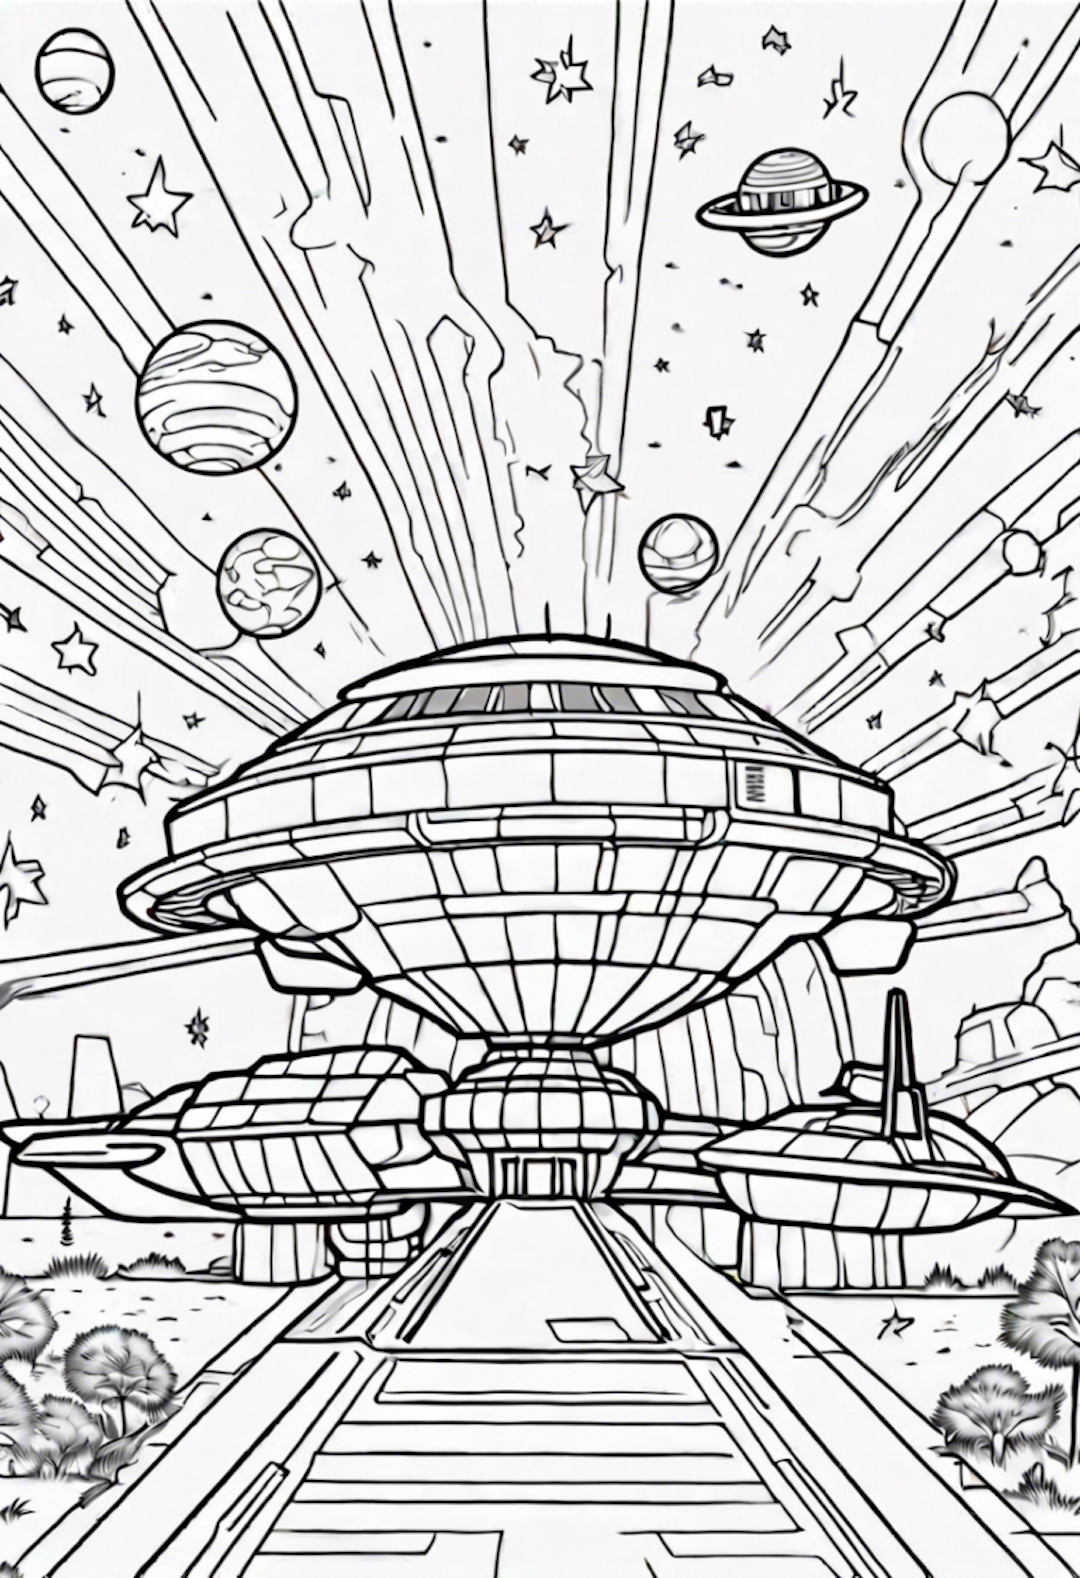 Spaceship Adventure in Outer Space coloring pages